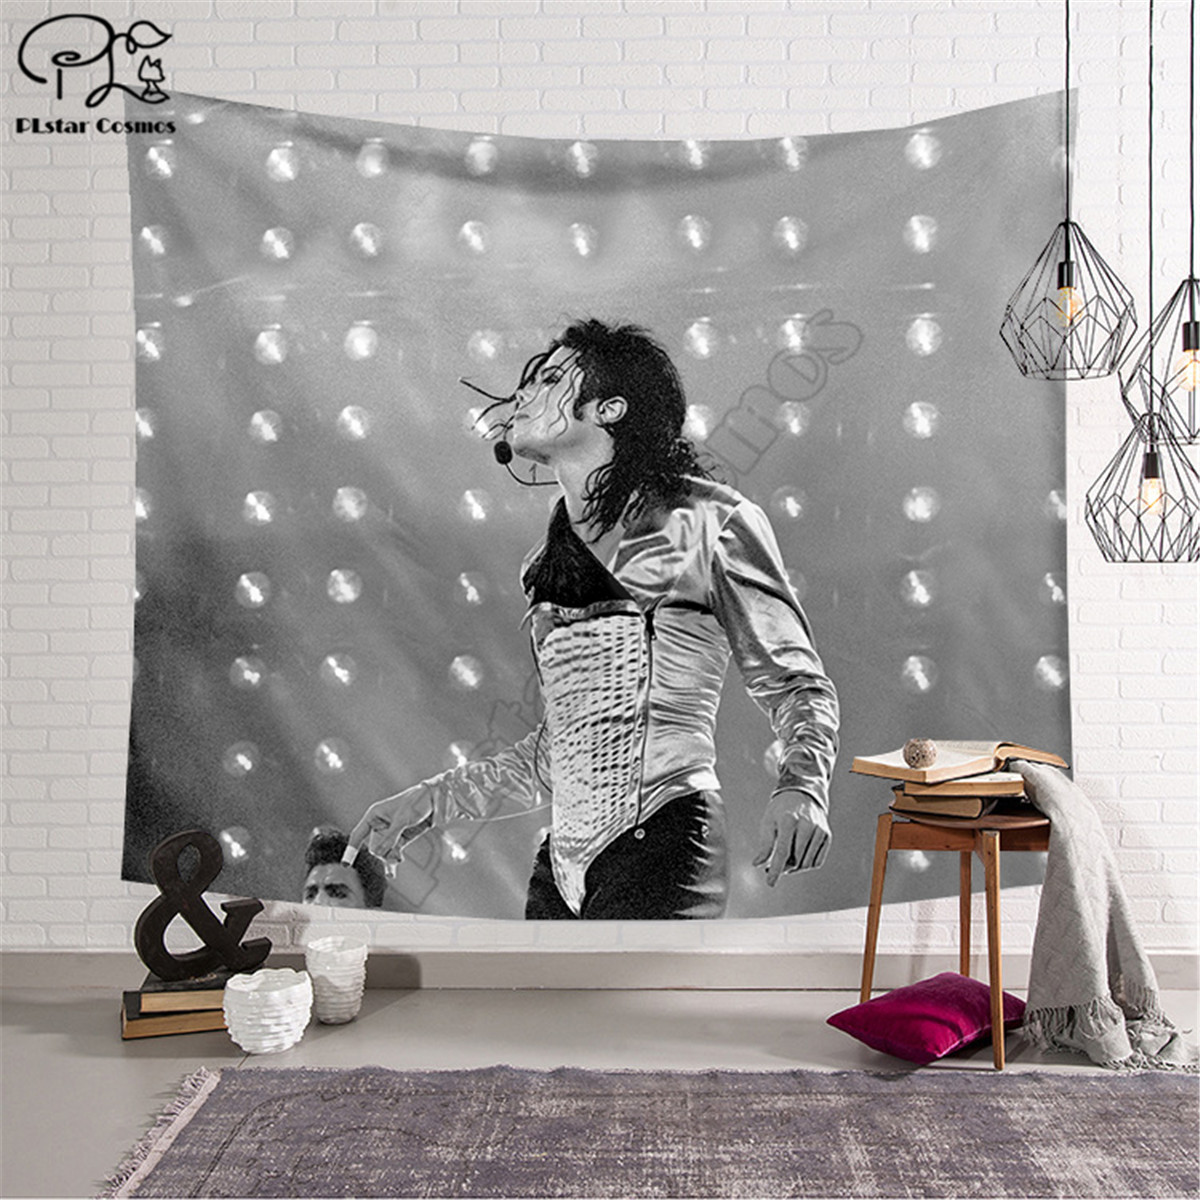 Michael Jackson pattern Funny cartoon Blanket Tapestry 3D Printed Tapestrying Rectangular Home Decor Wall Hanging style-3